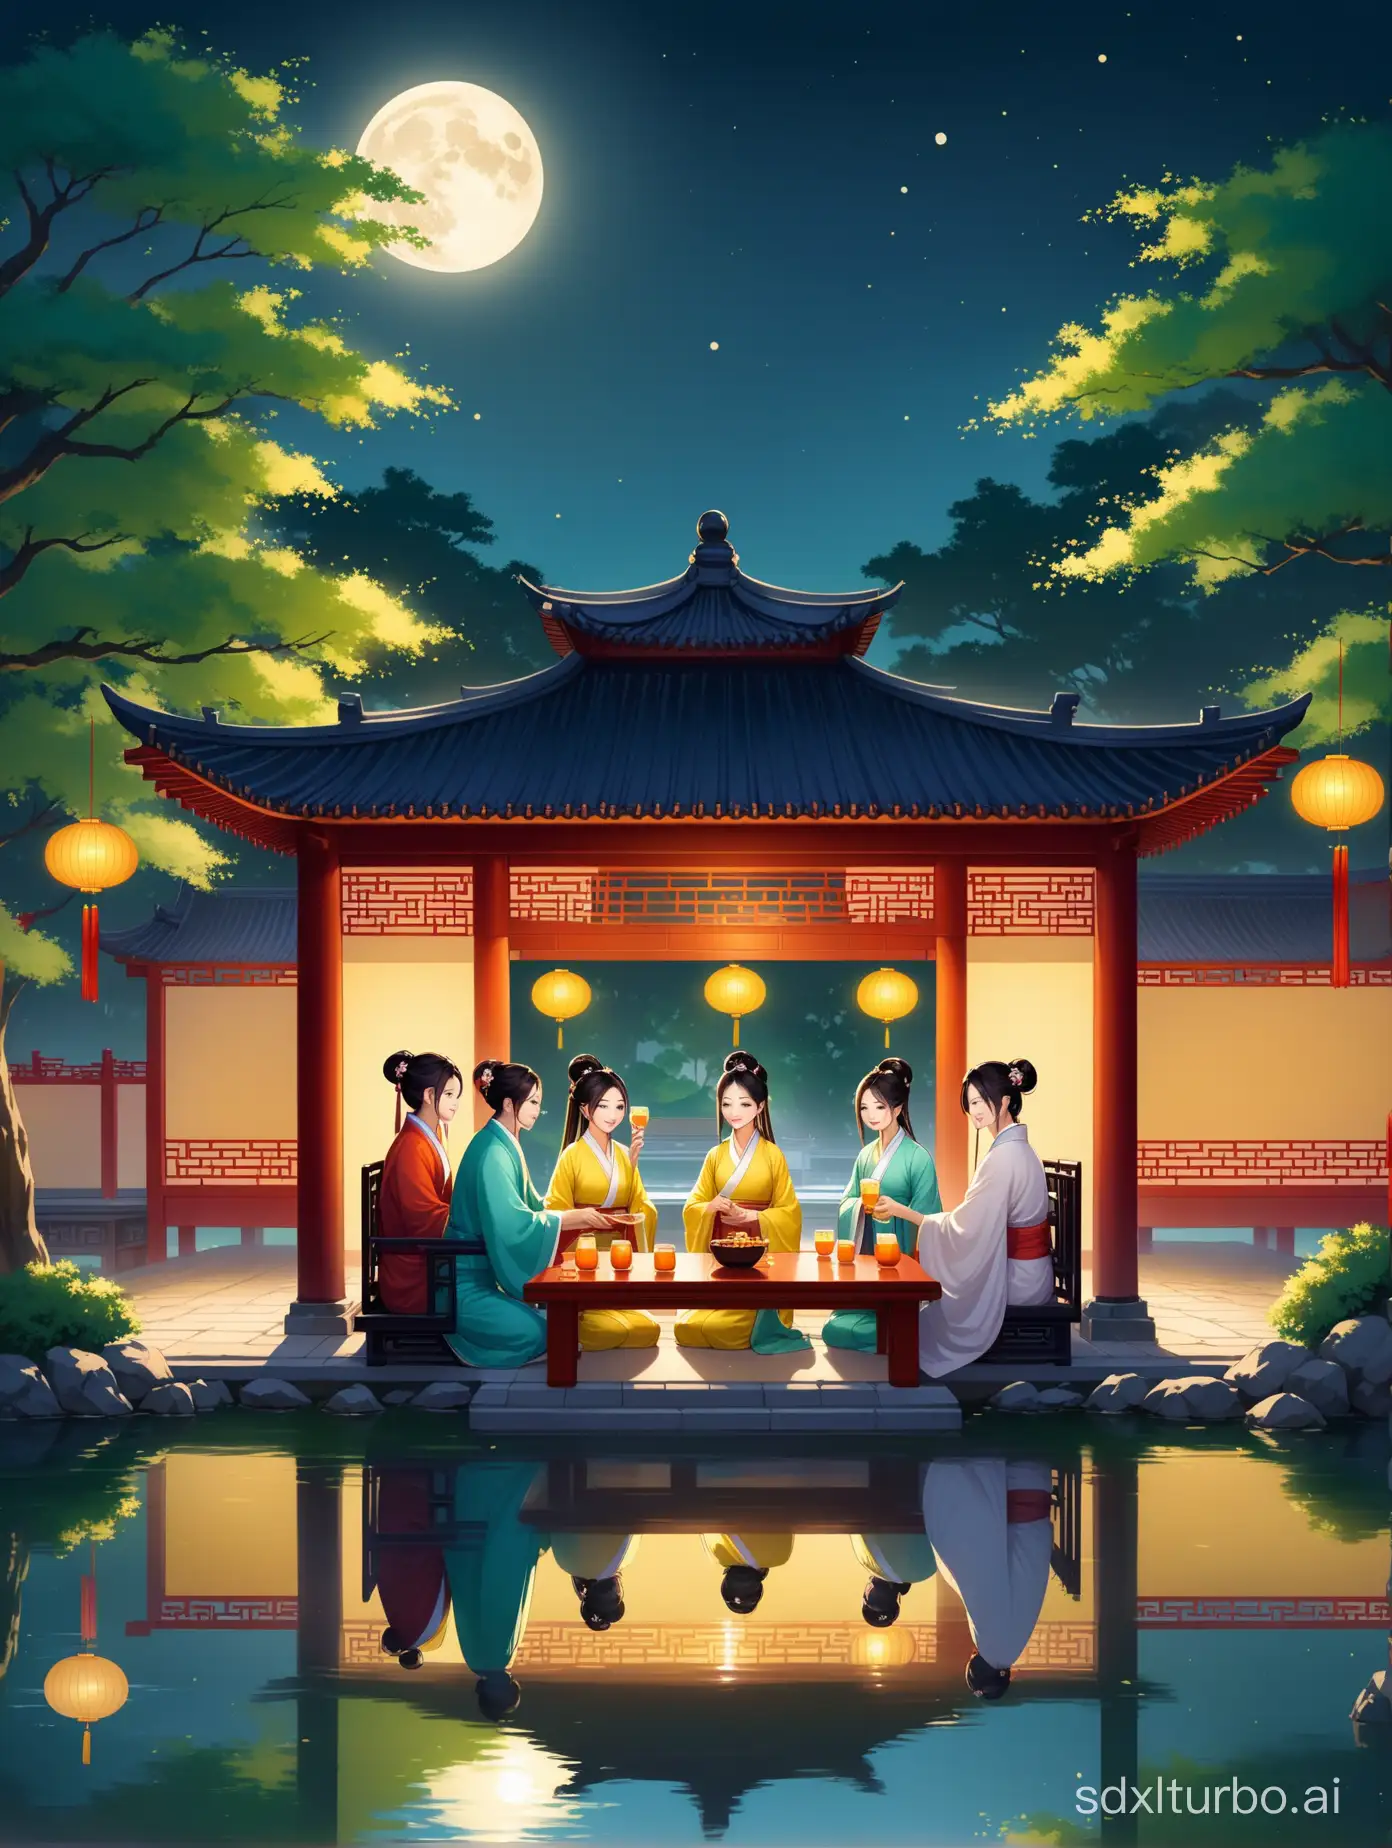 A traditional Chinese Mid-Autumn Festival celebration under the full moon, featuring ancient Chinese scholars in Hanfu (traditional Han Chinese clothing) gathered around a table, enjoying a drink and laughing merrily. The setting is a classical Chinese garden with a pavilion, stone paths, lush greenery, and a serene pond reflecting the moonlight. The atmosphere is joyous and festive, imbued with a sense of timeless elegance and cultural richness.